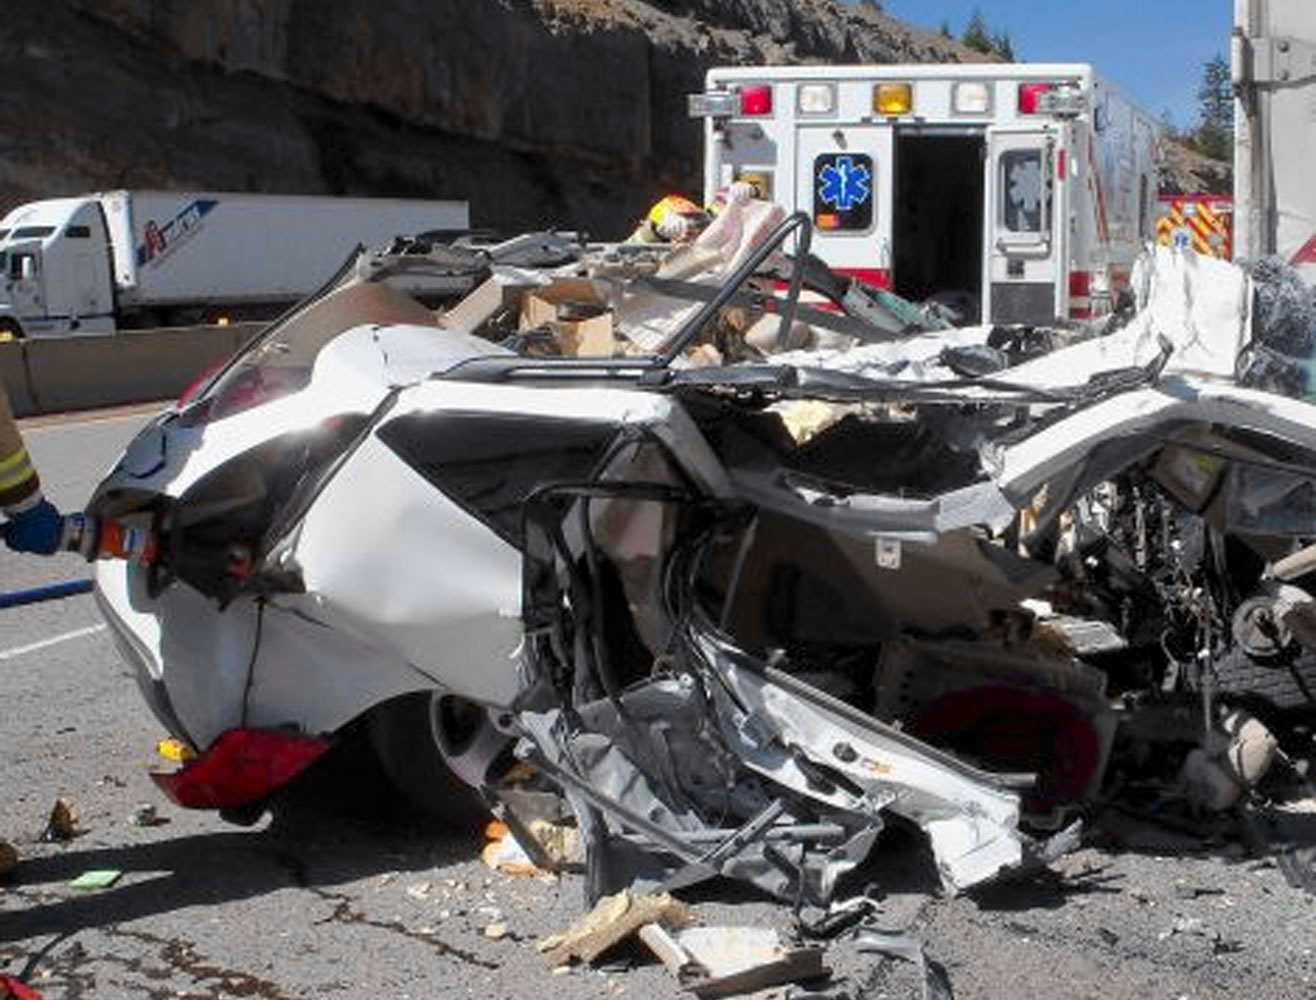 The wreckage of a car driven by Carol Dunsmore, 75, of Vancouver sits on Interstate 5 near Siskiyou Summit in Oregon.